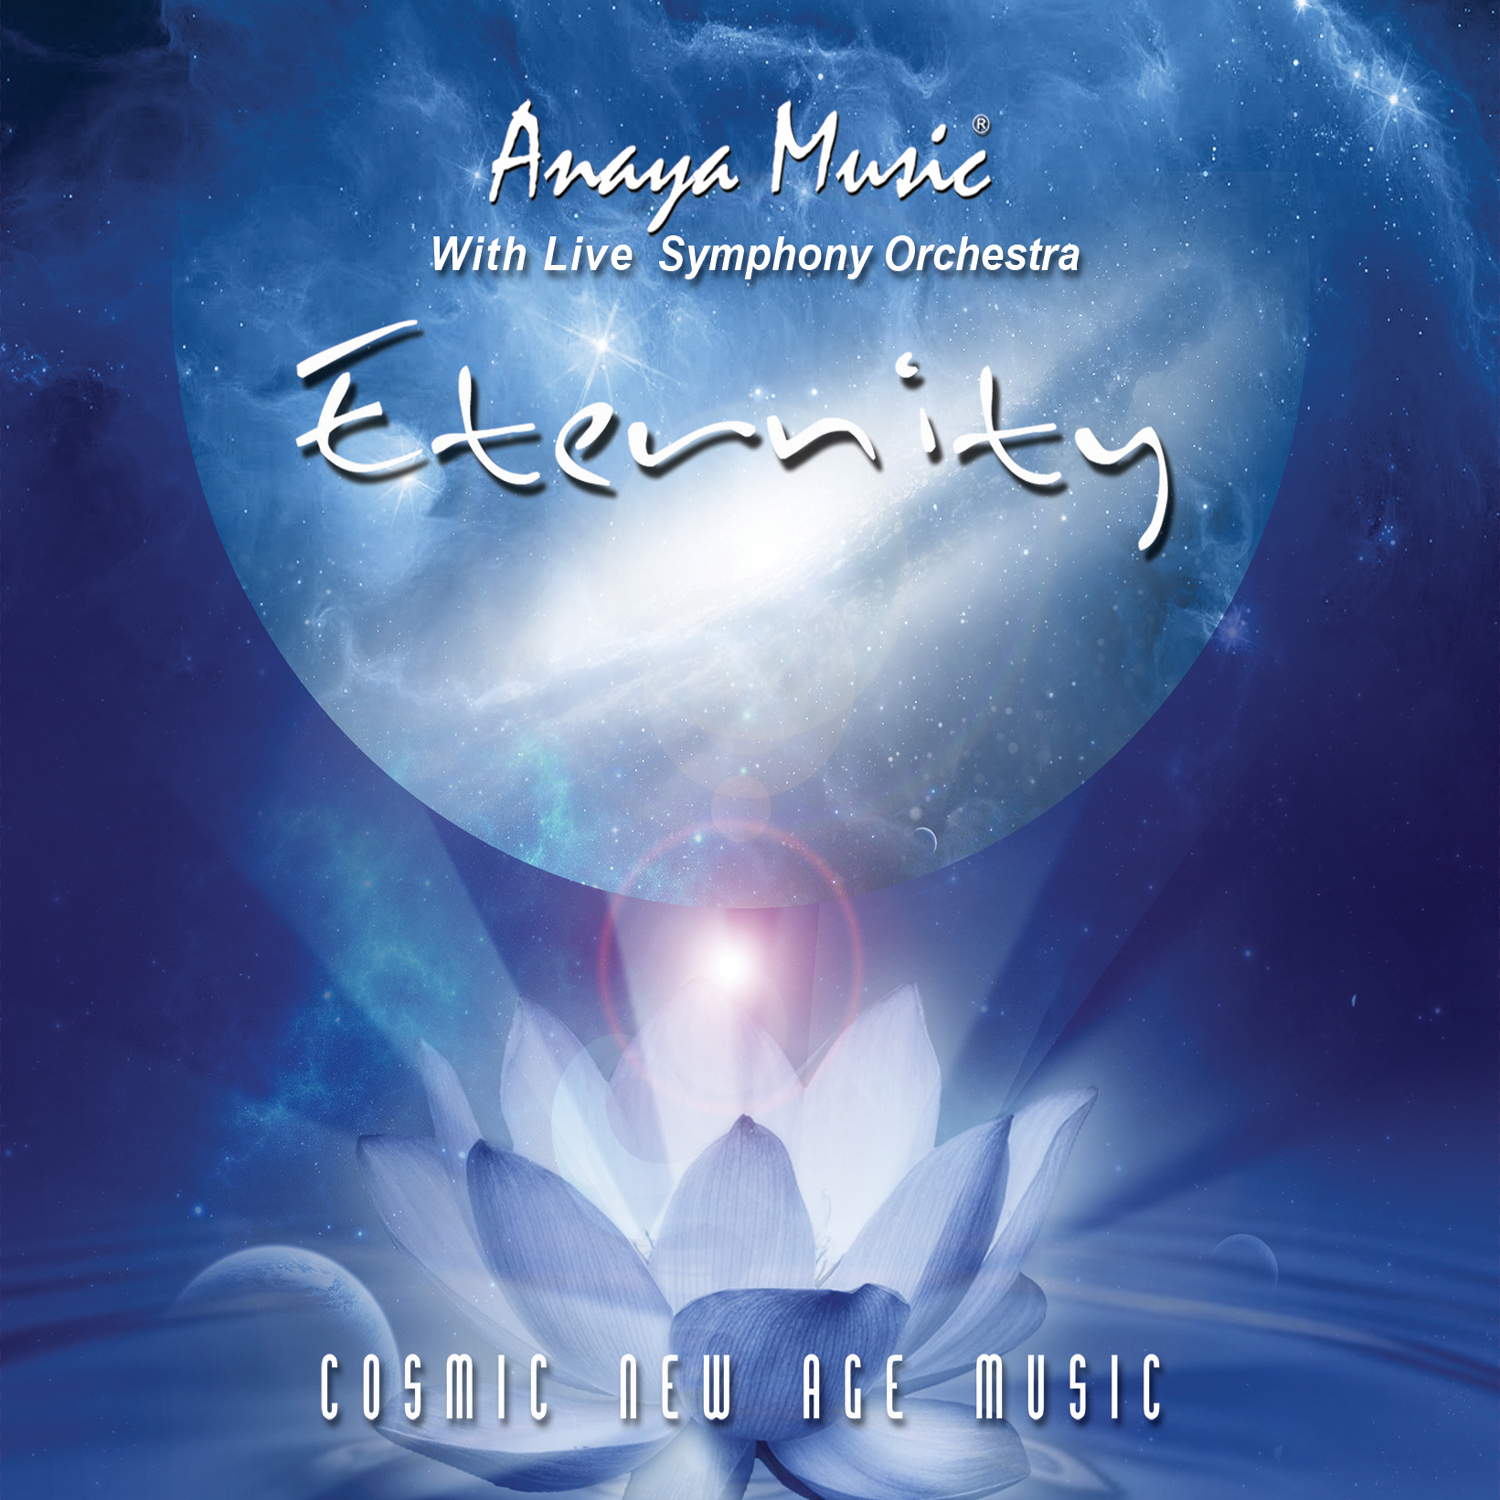 Eternity by AnayaMusic: submitted to the 59th GRAMMY(R) Awards in the New Age category.